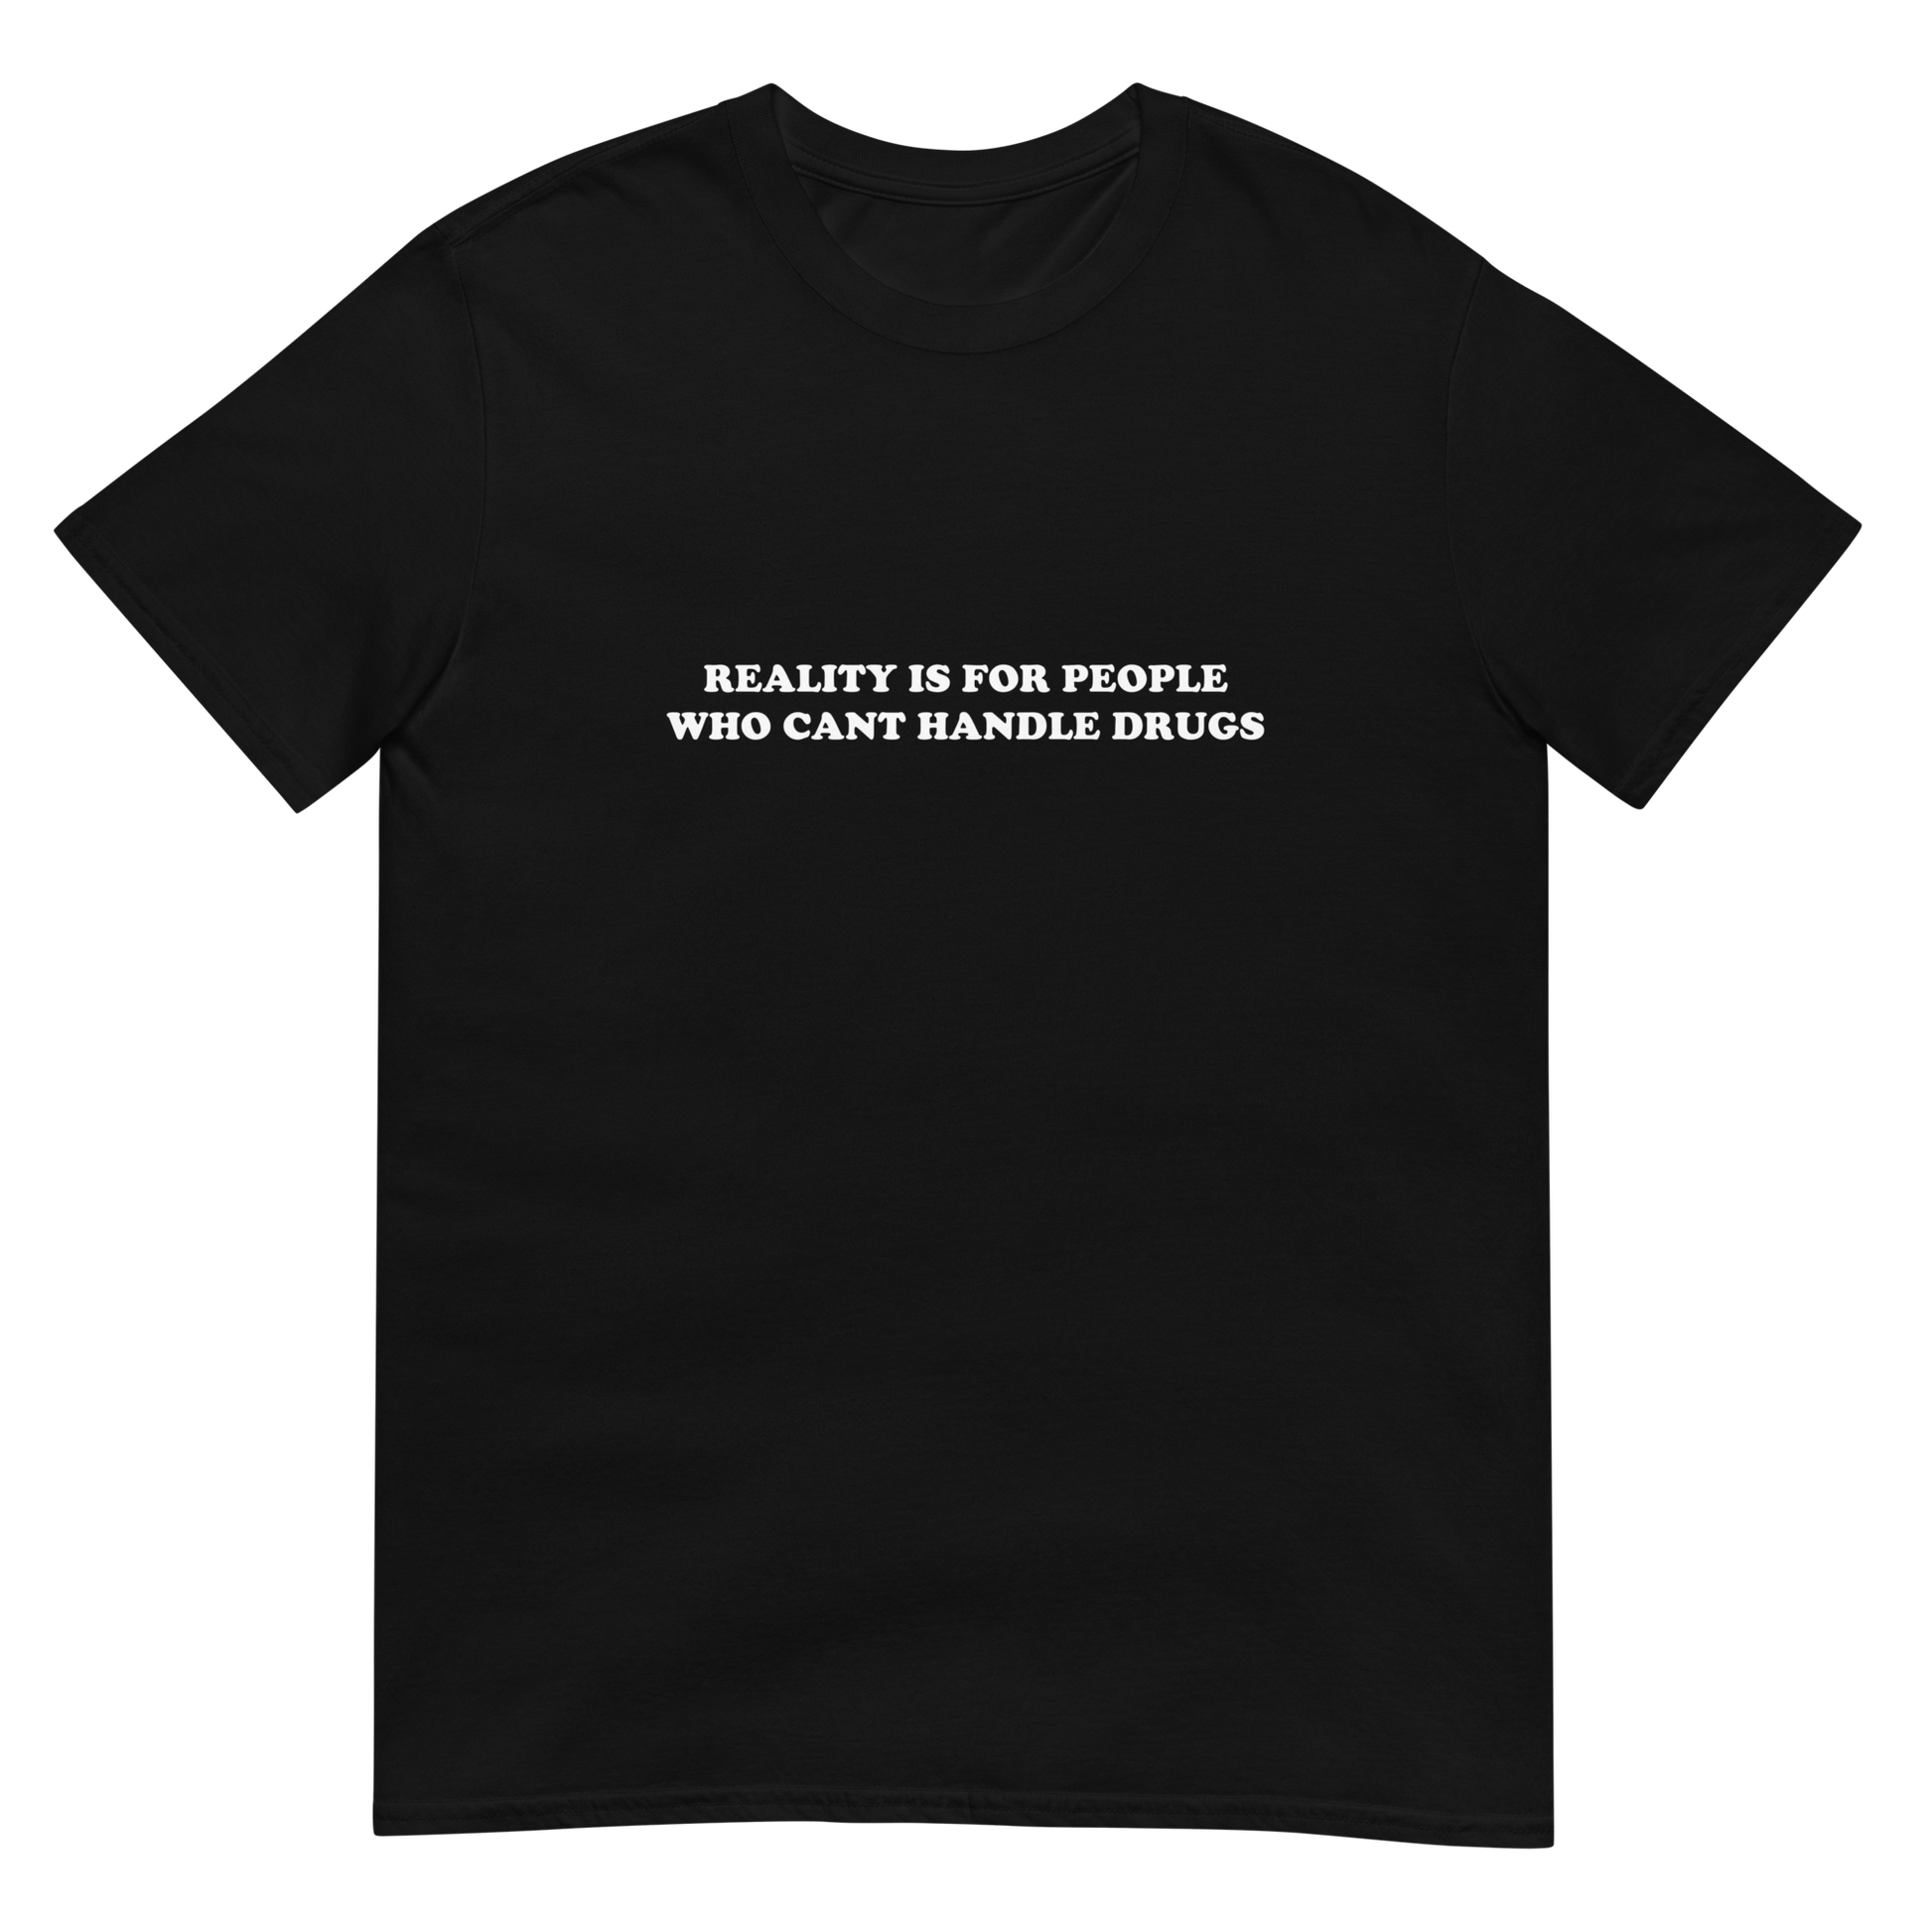 Reality is for people who can't handle drugs. – Shirts That Go Hard